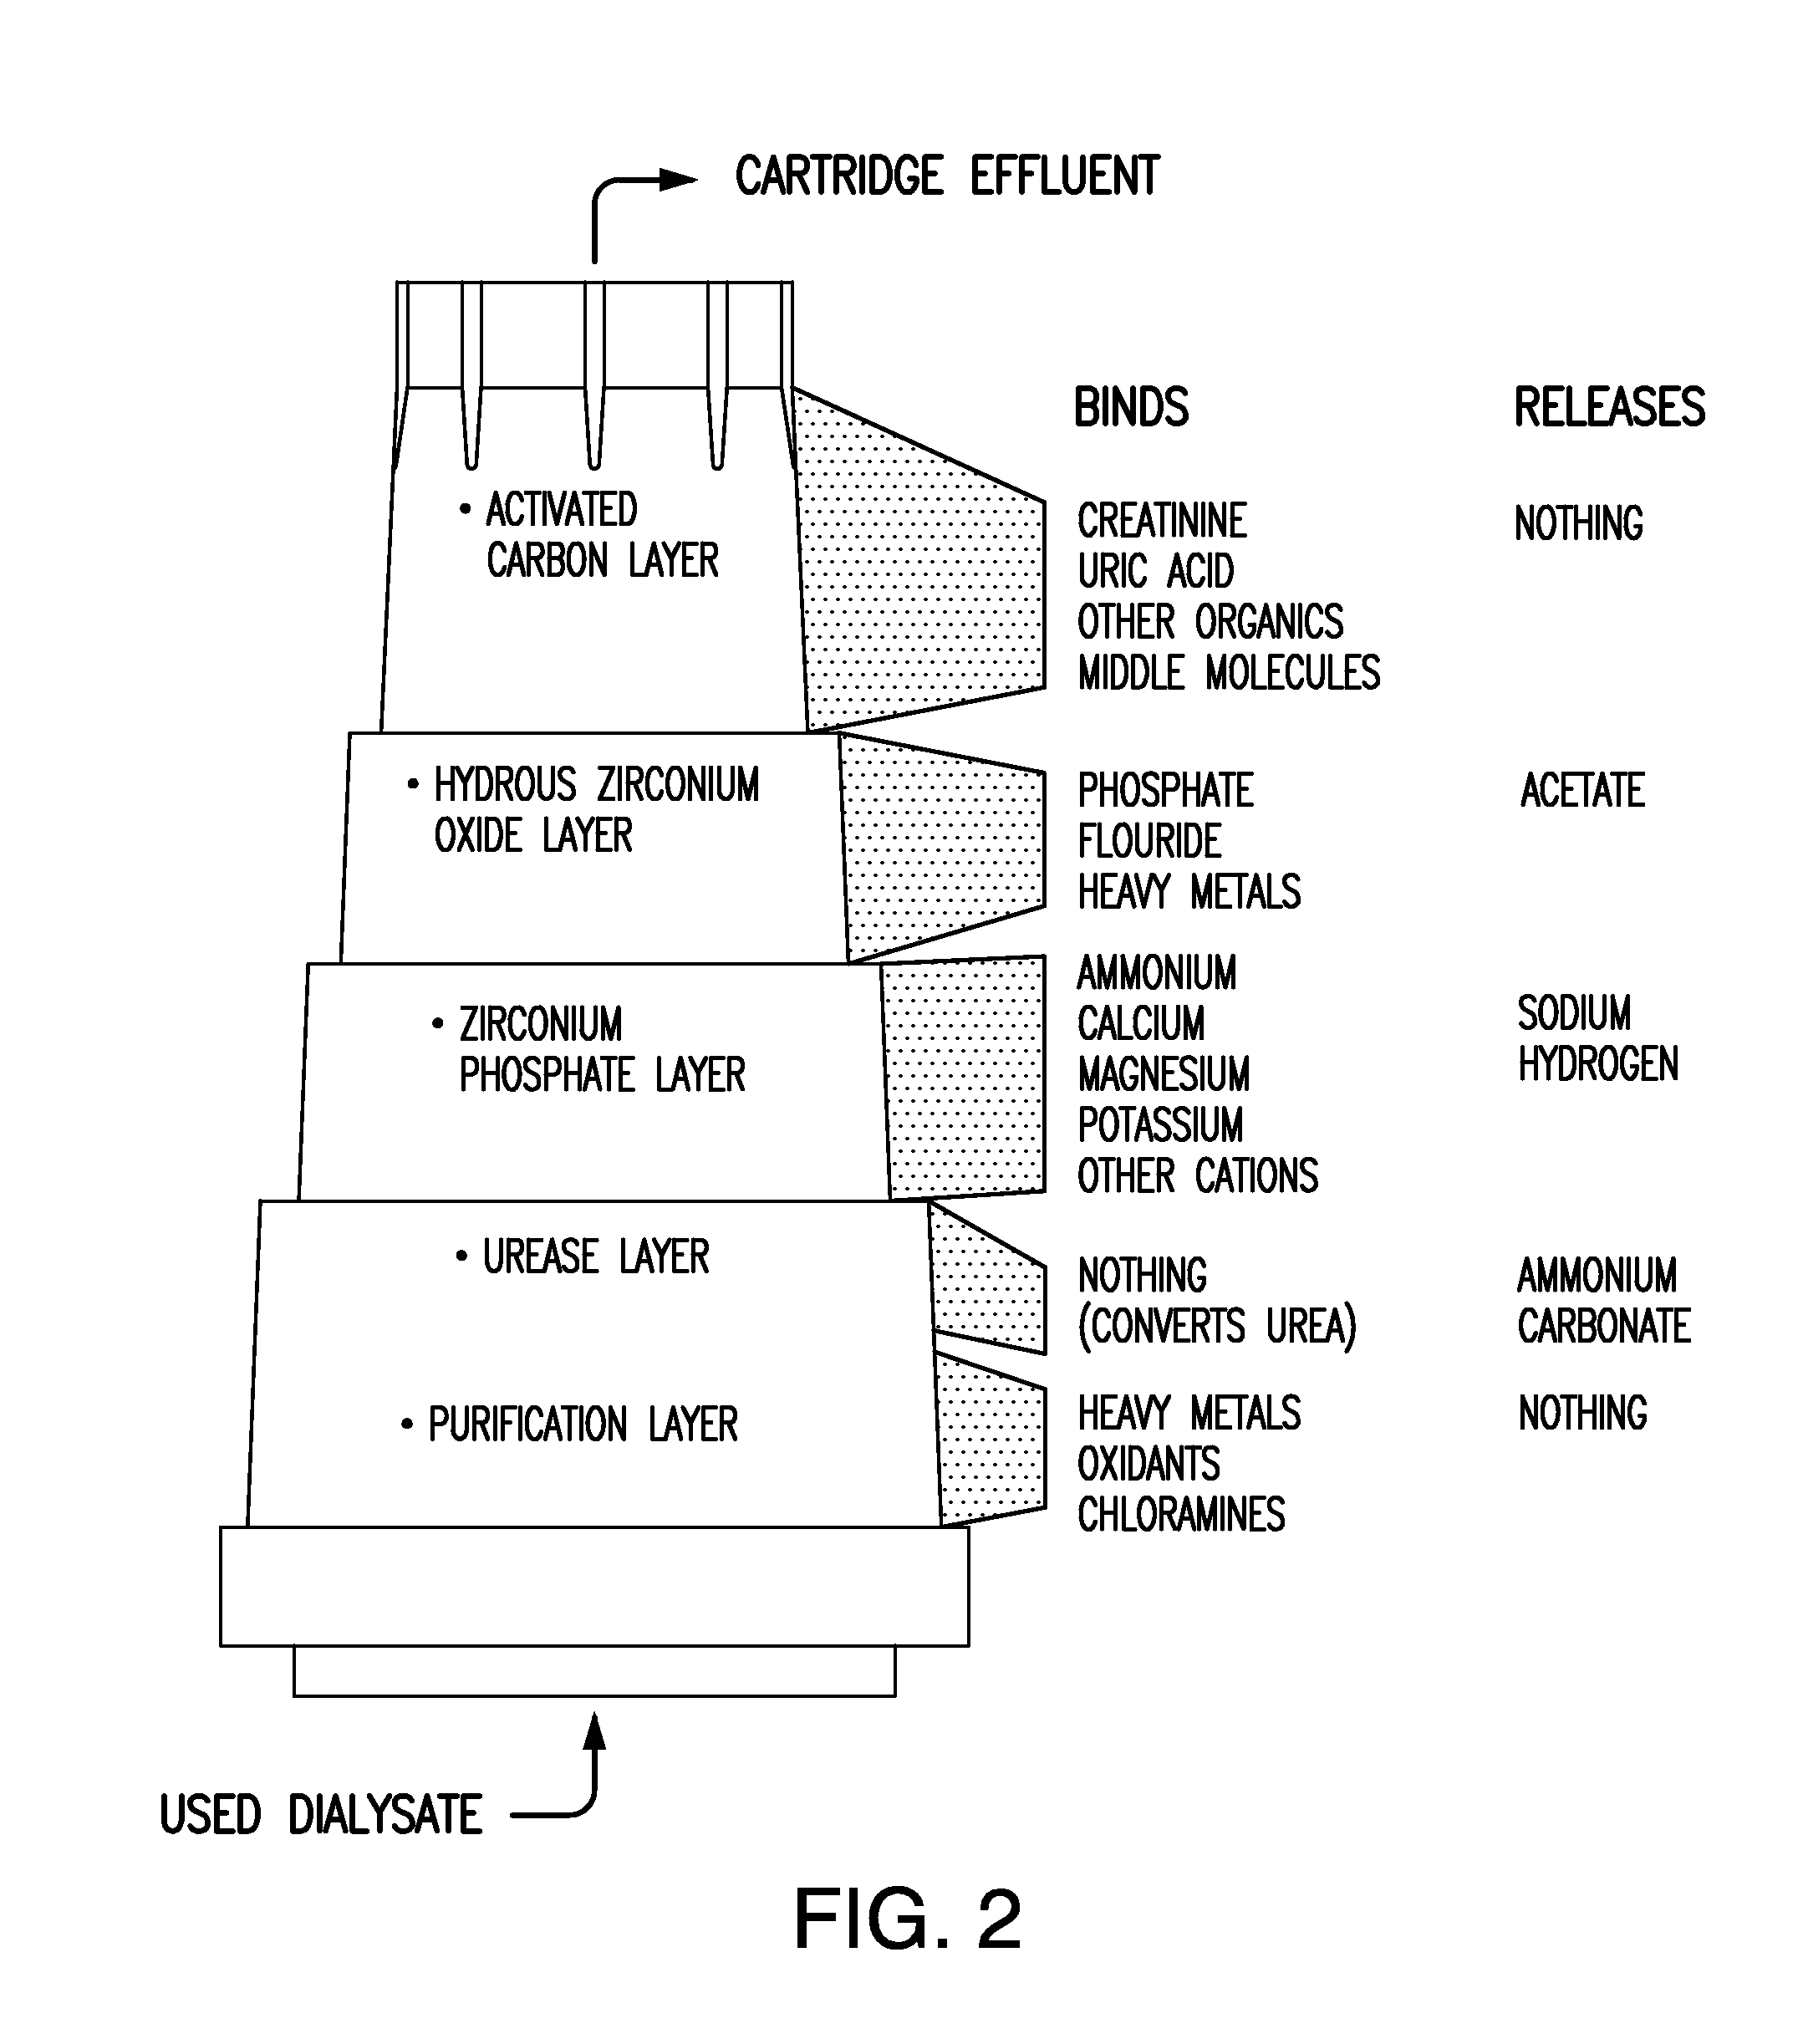 Method For Treating Dialysate, Dialysis System, And Method For Pre-Evaluating Dialysis Patients For Treatment With Same